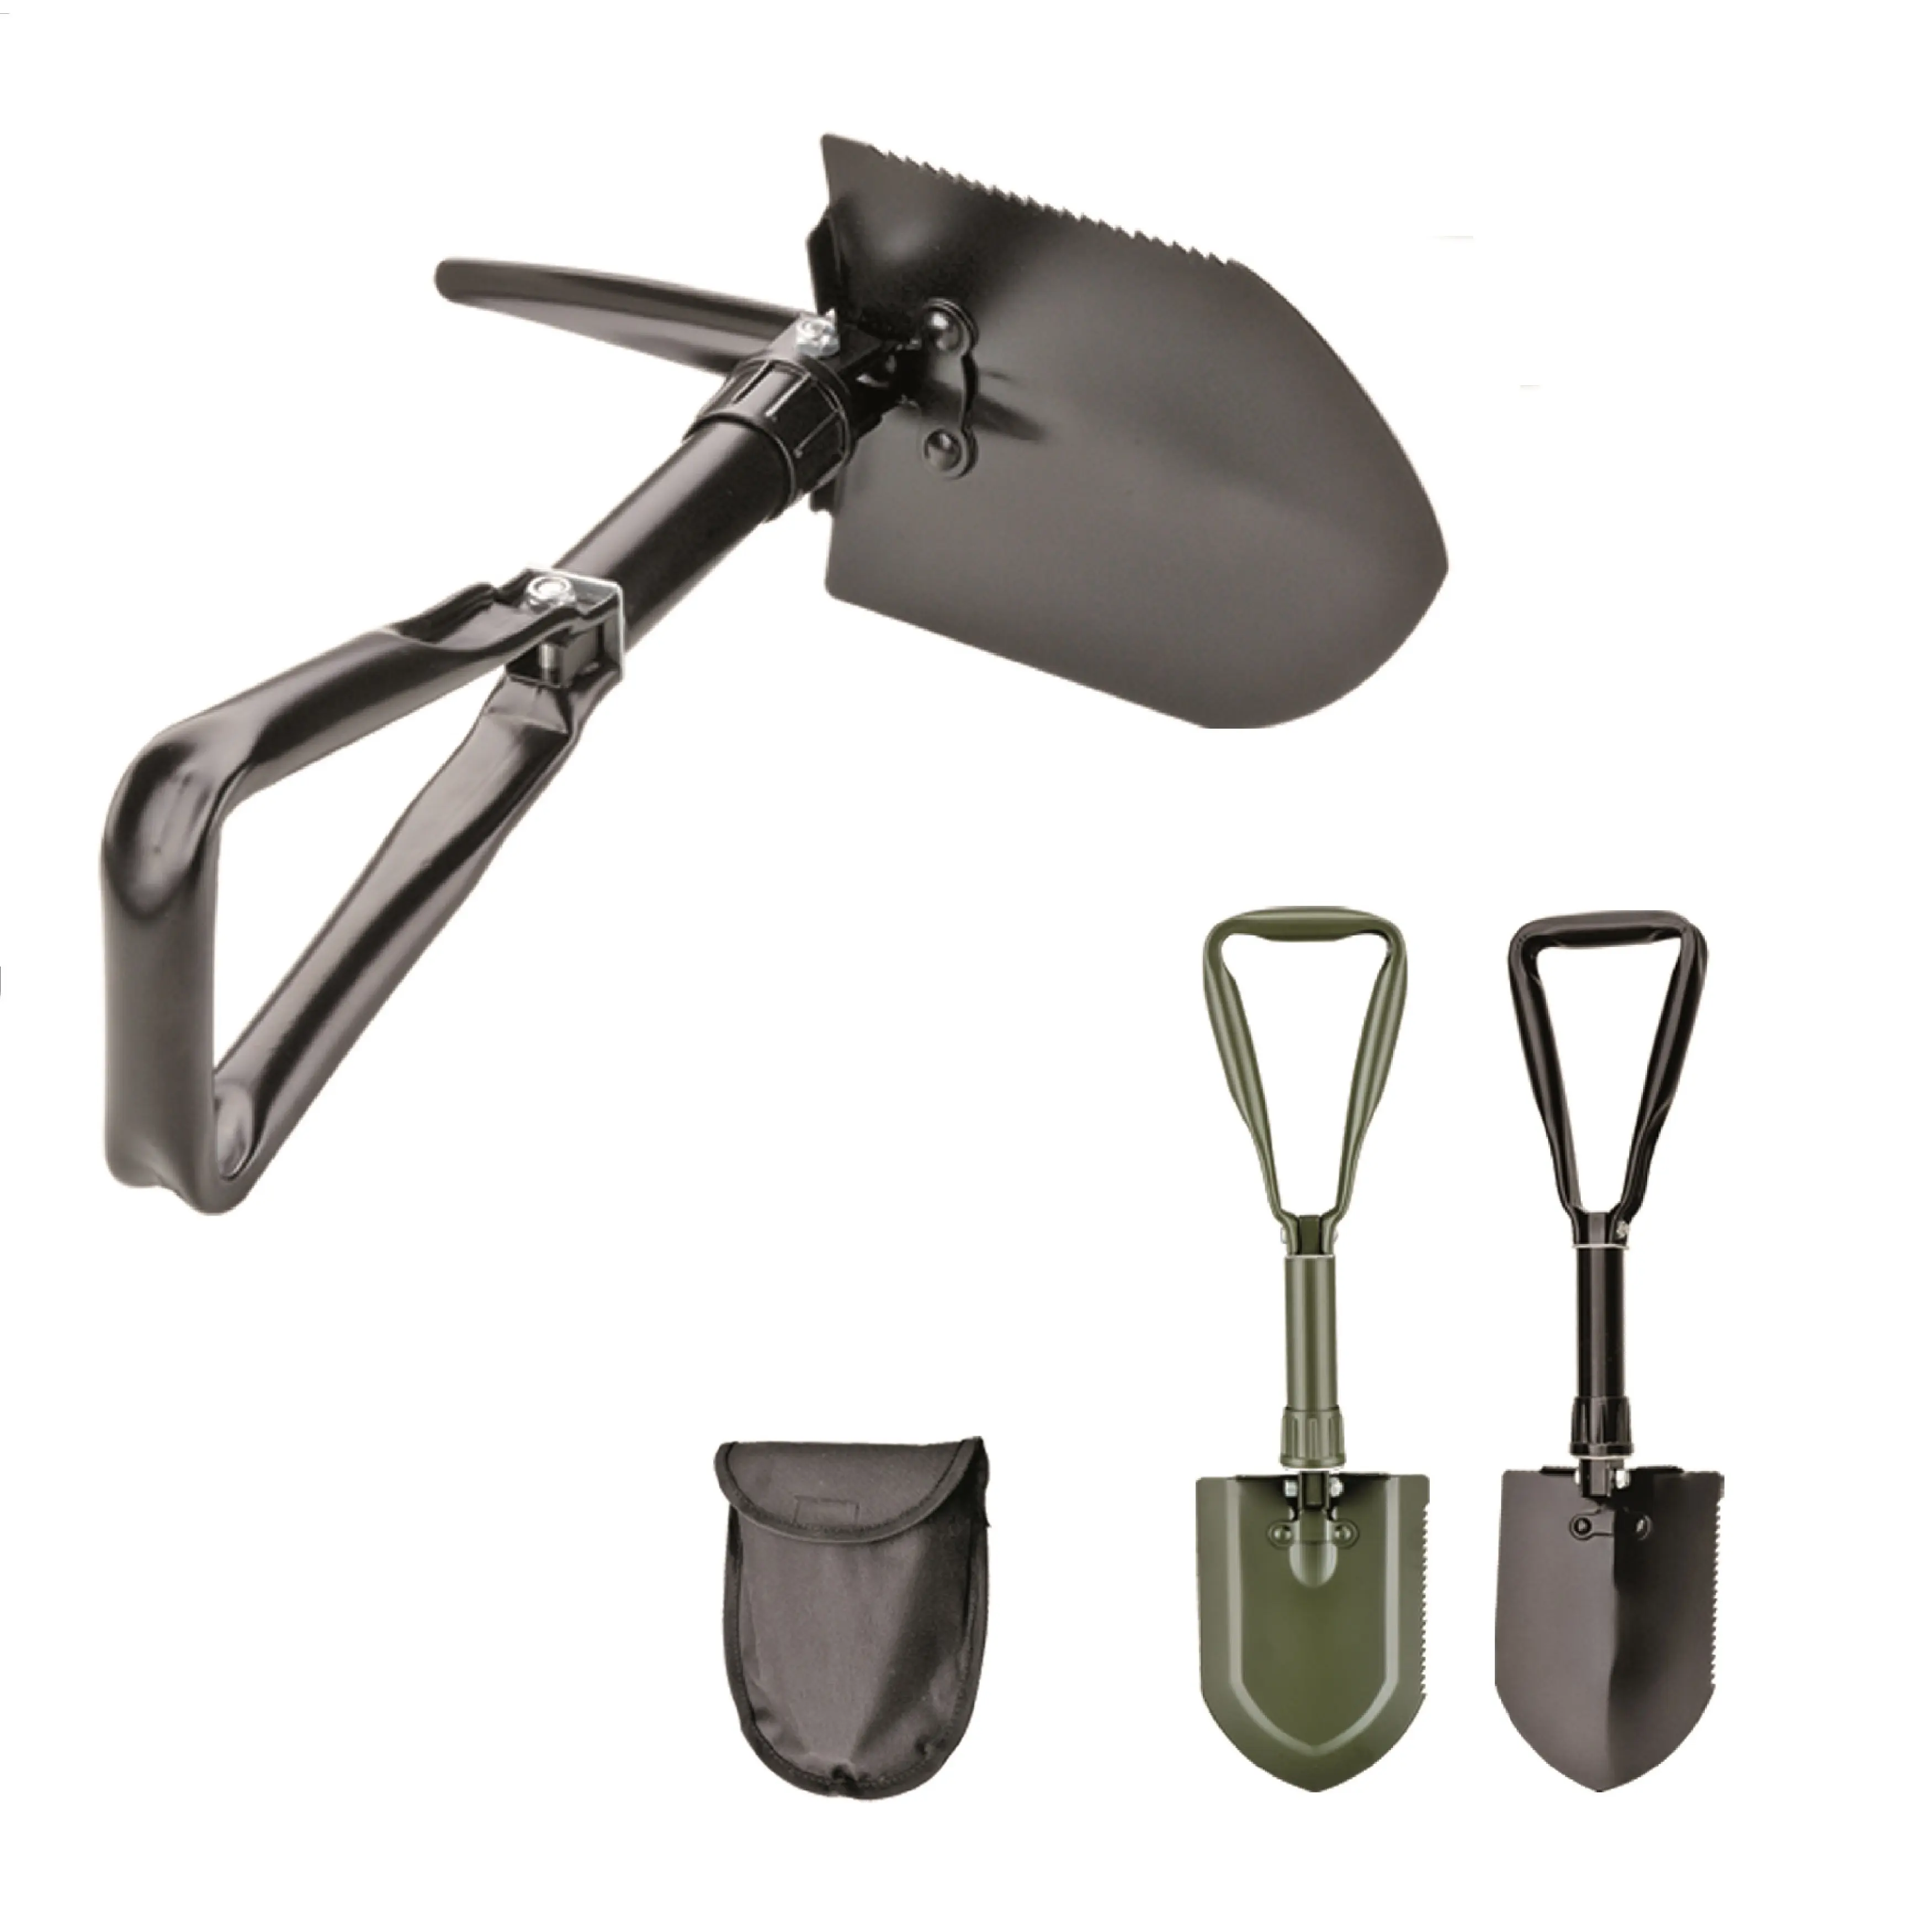 303G Folding Survival Shovel、Camping Tactical Shovel w/Pick - Heavy Duty、Entrenching ToolためOff Road、Camping、Gardening、Beach